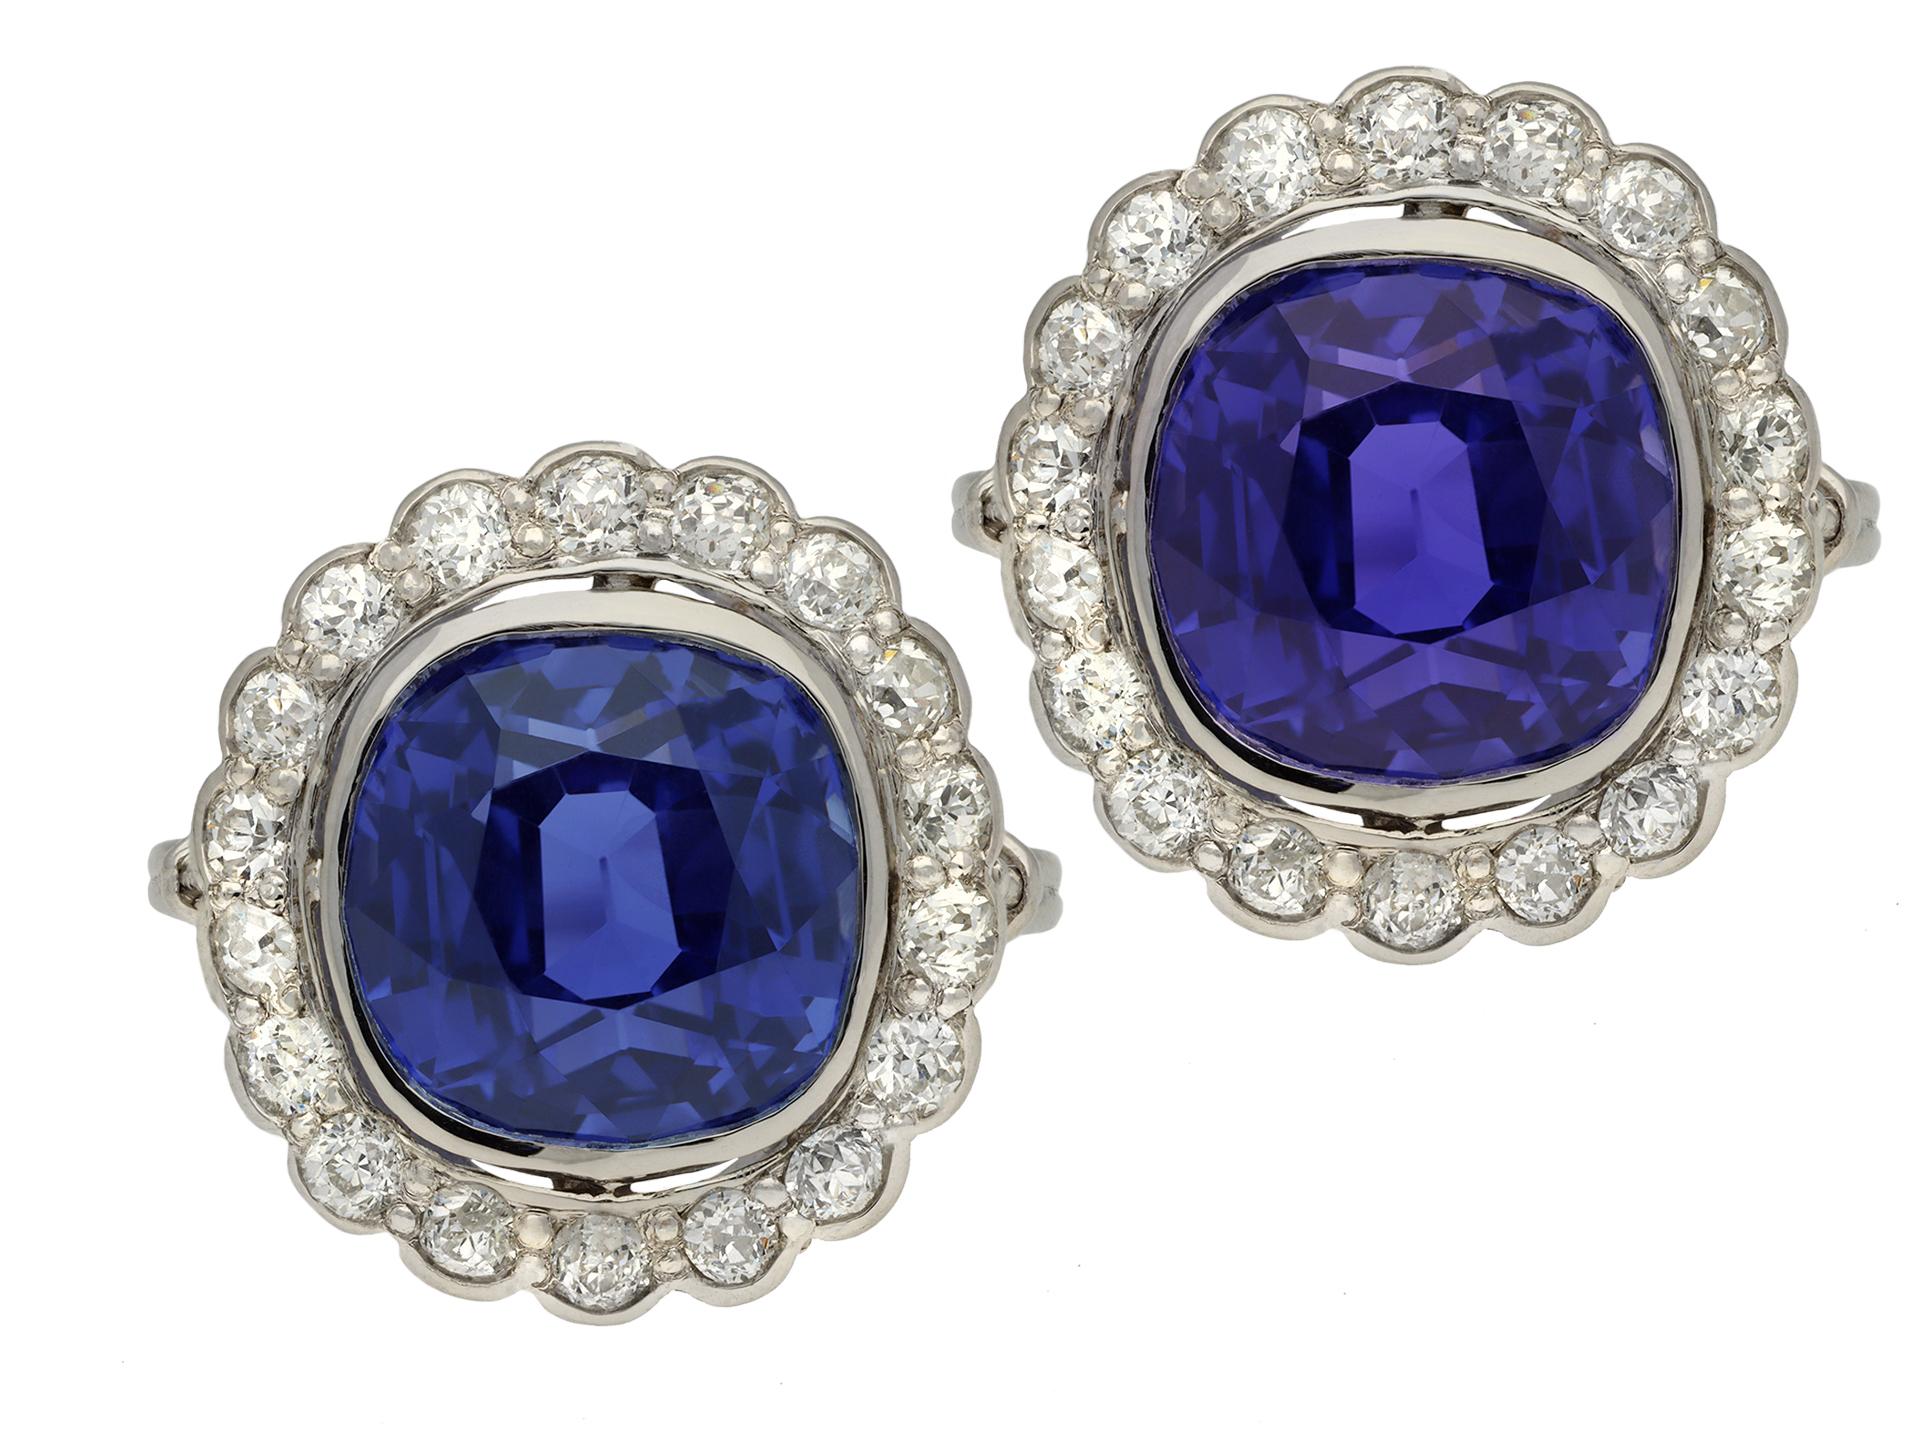 Ceylon colour change sapphire and diamond coronet cluster ring. Centrally set with a cushion shape old cut natural unenhanced Ceylon blue/purple colour change sapphire, blue in daylight, purple in incandescent light, in an open back rubover setting